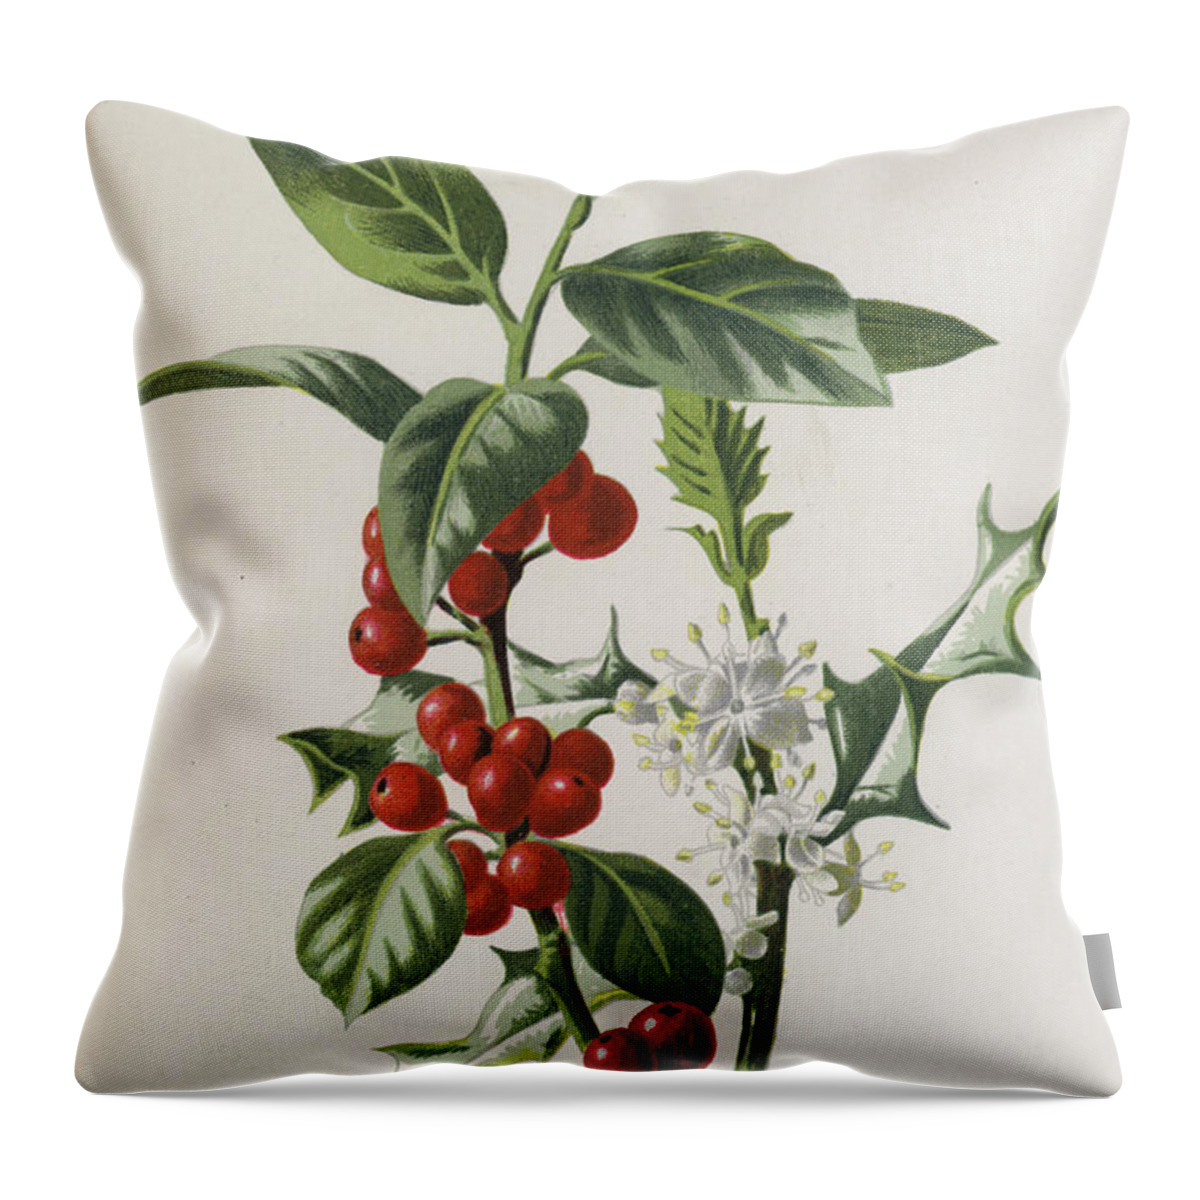 Holly Throw Pillow featuring the painting Holly by Frederick Edward Hulme